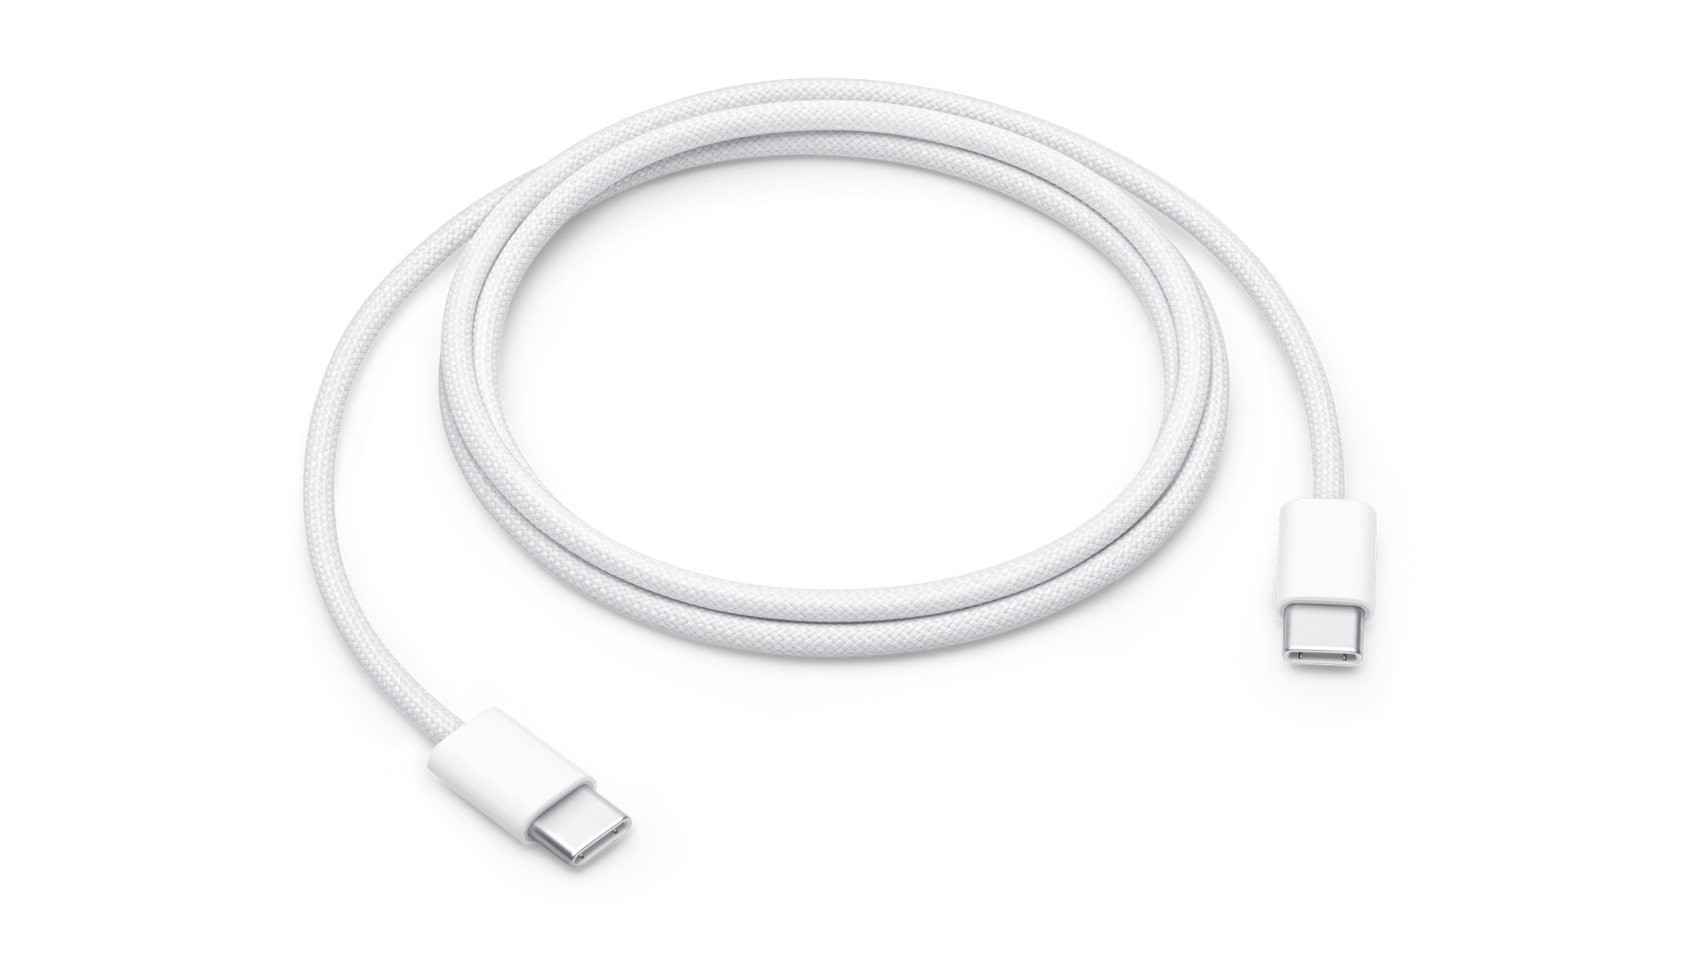 Apple already sells conventional USB-C cables